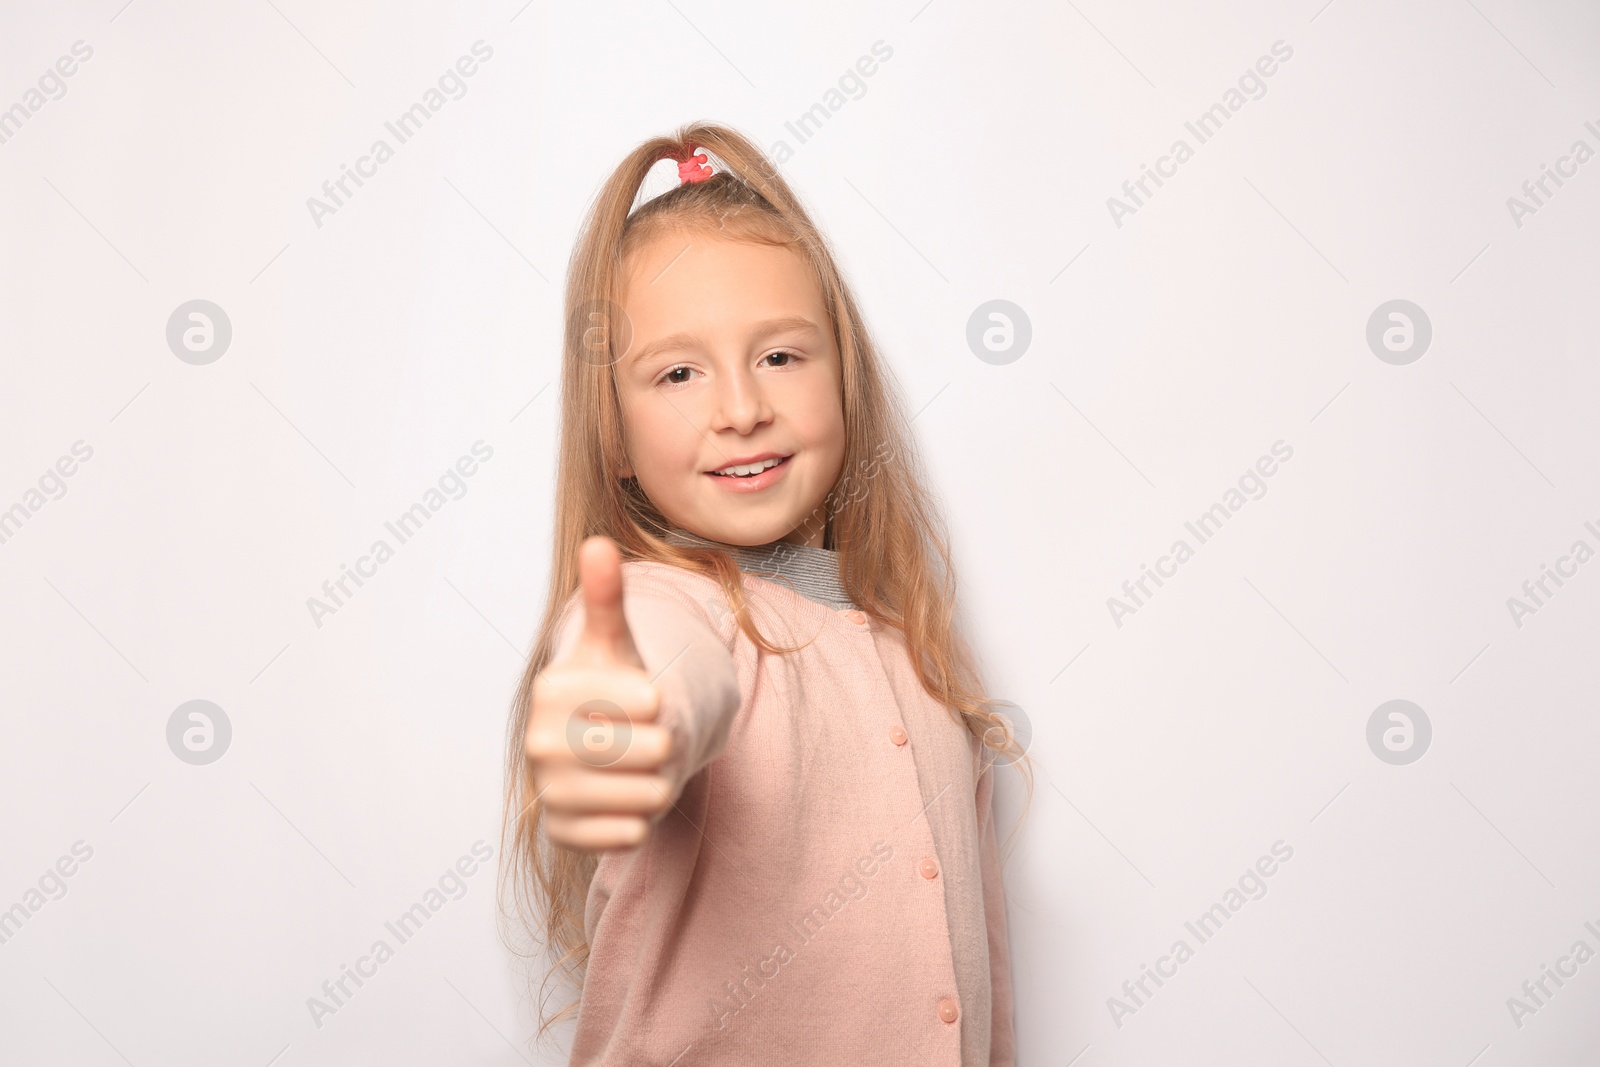 Photo of Happy little girl showing thumbs up on white background